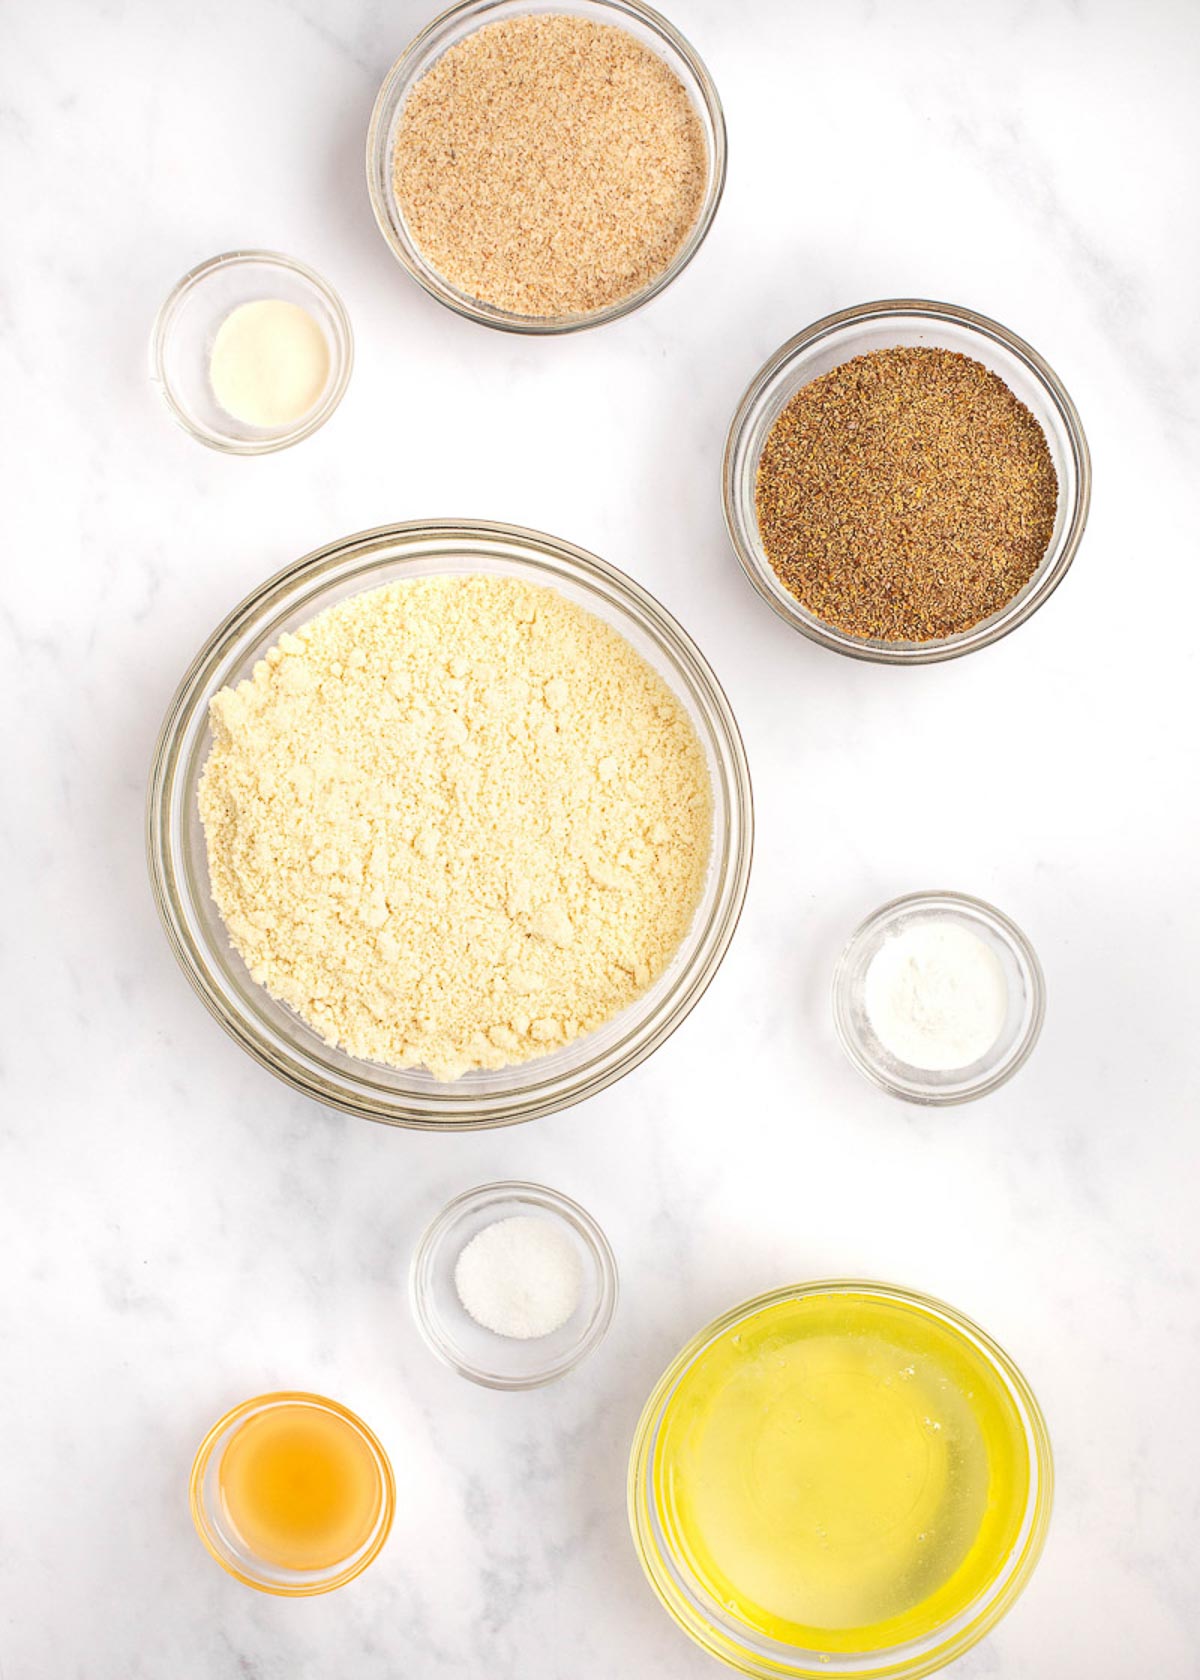 Overhead view of the ingredients needed for low carb bread: bowls of psyllium husk flakes, ground flaxseed meal, almond flour, sea salt, baking powder, xanthan gum, apple cider vinegar, and egg whites.